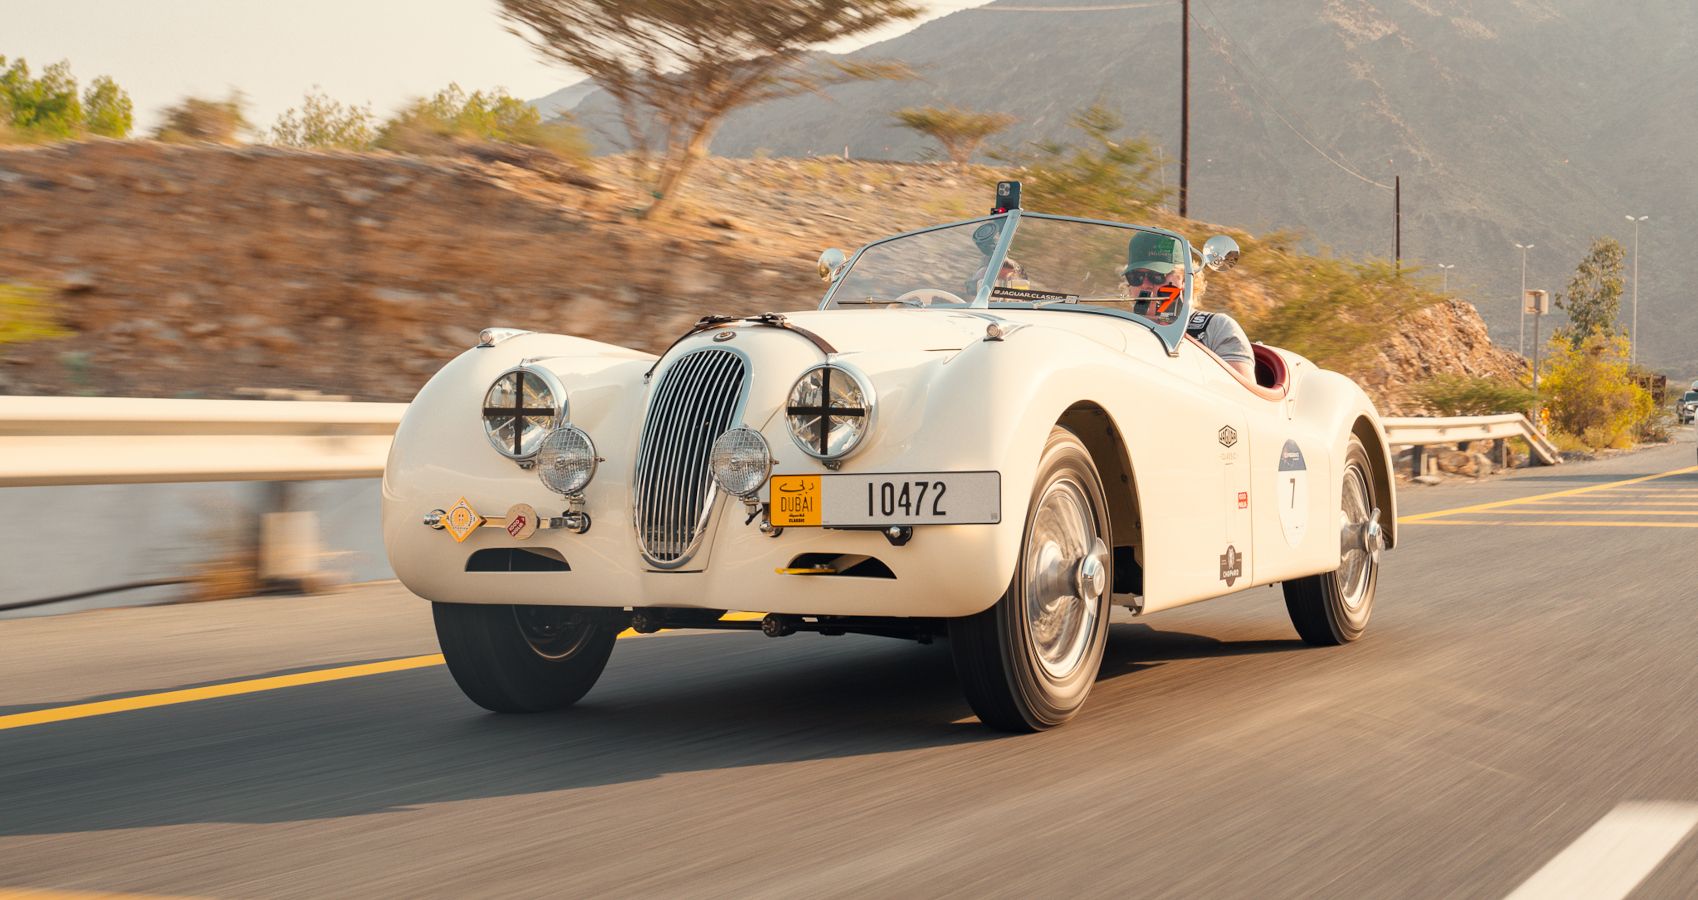 How The Jaguar XK120 Became The World’s Fastest Car In The 1940s